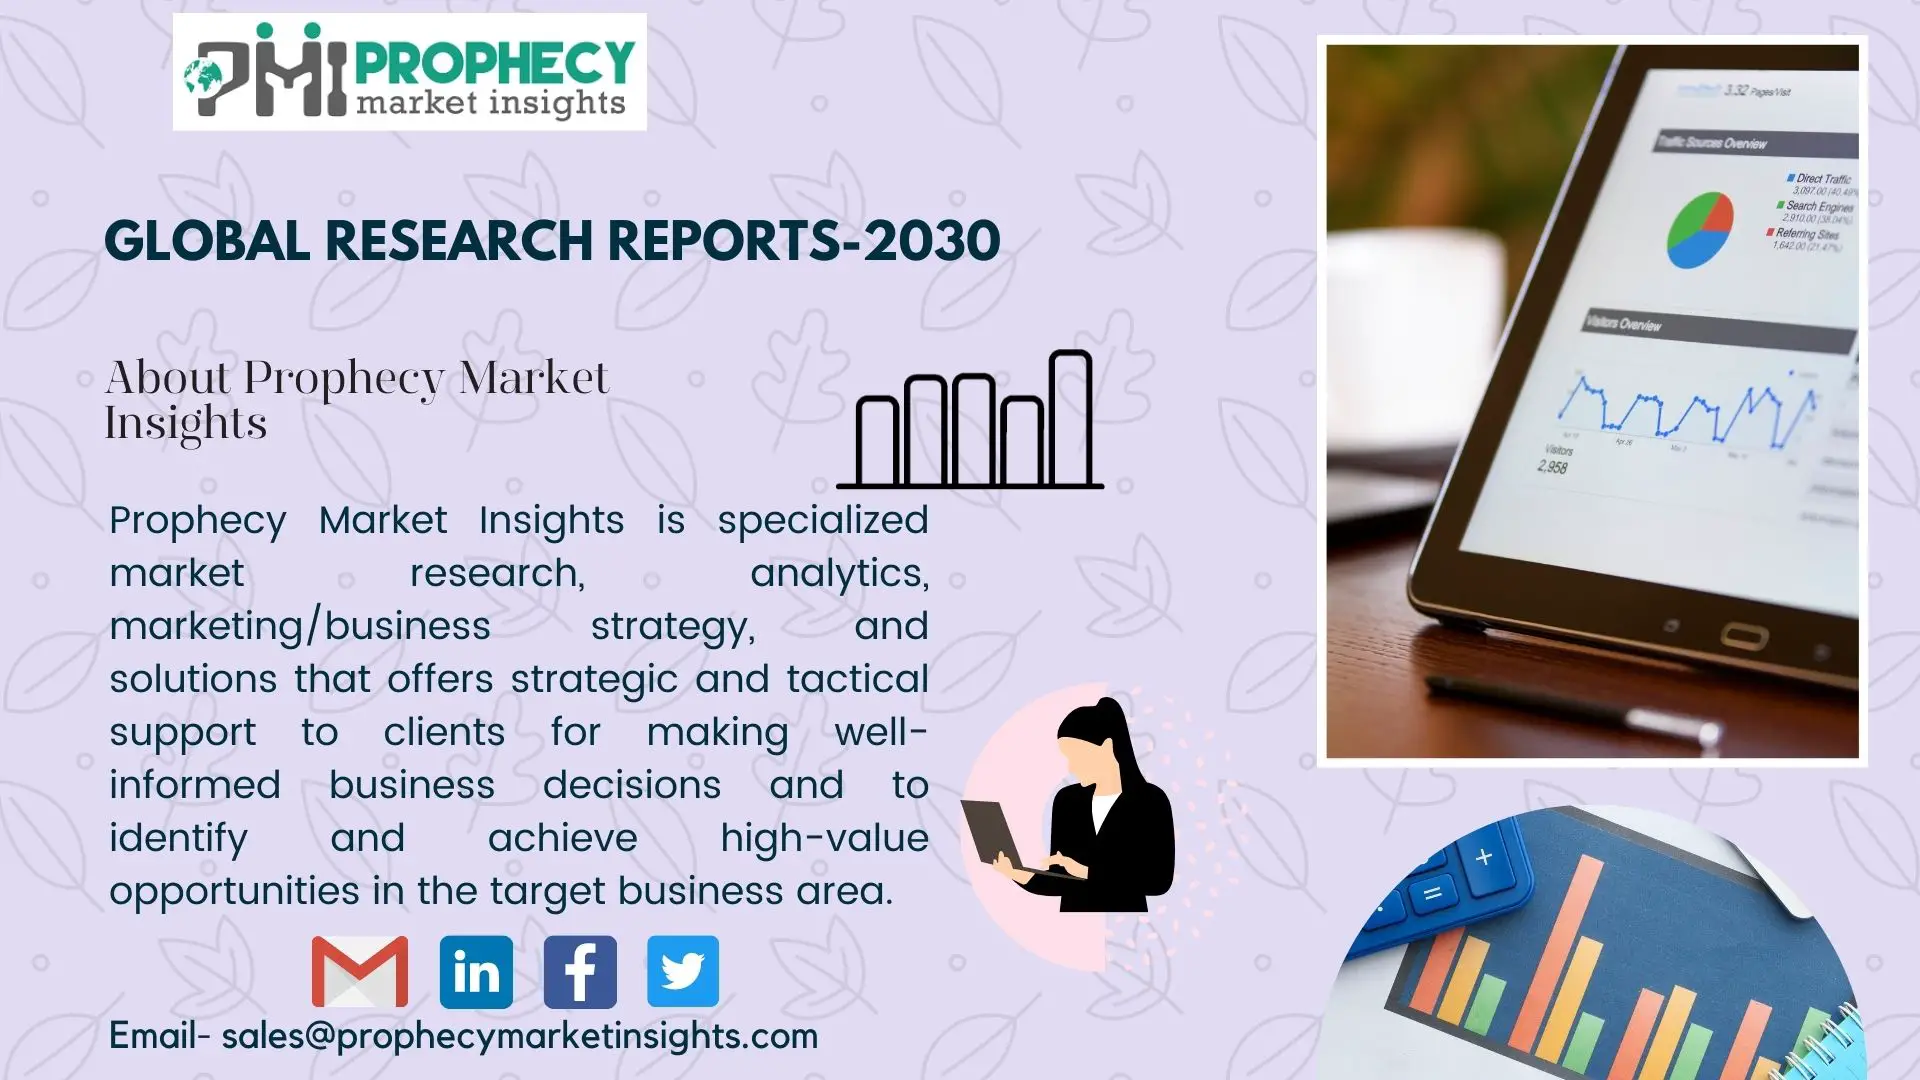 About Prophecy Market Insights-035e1f53